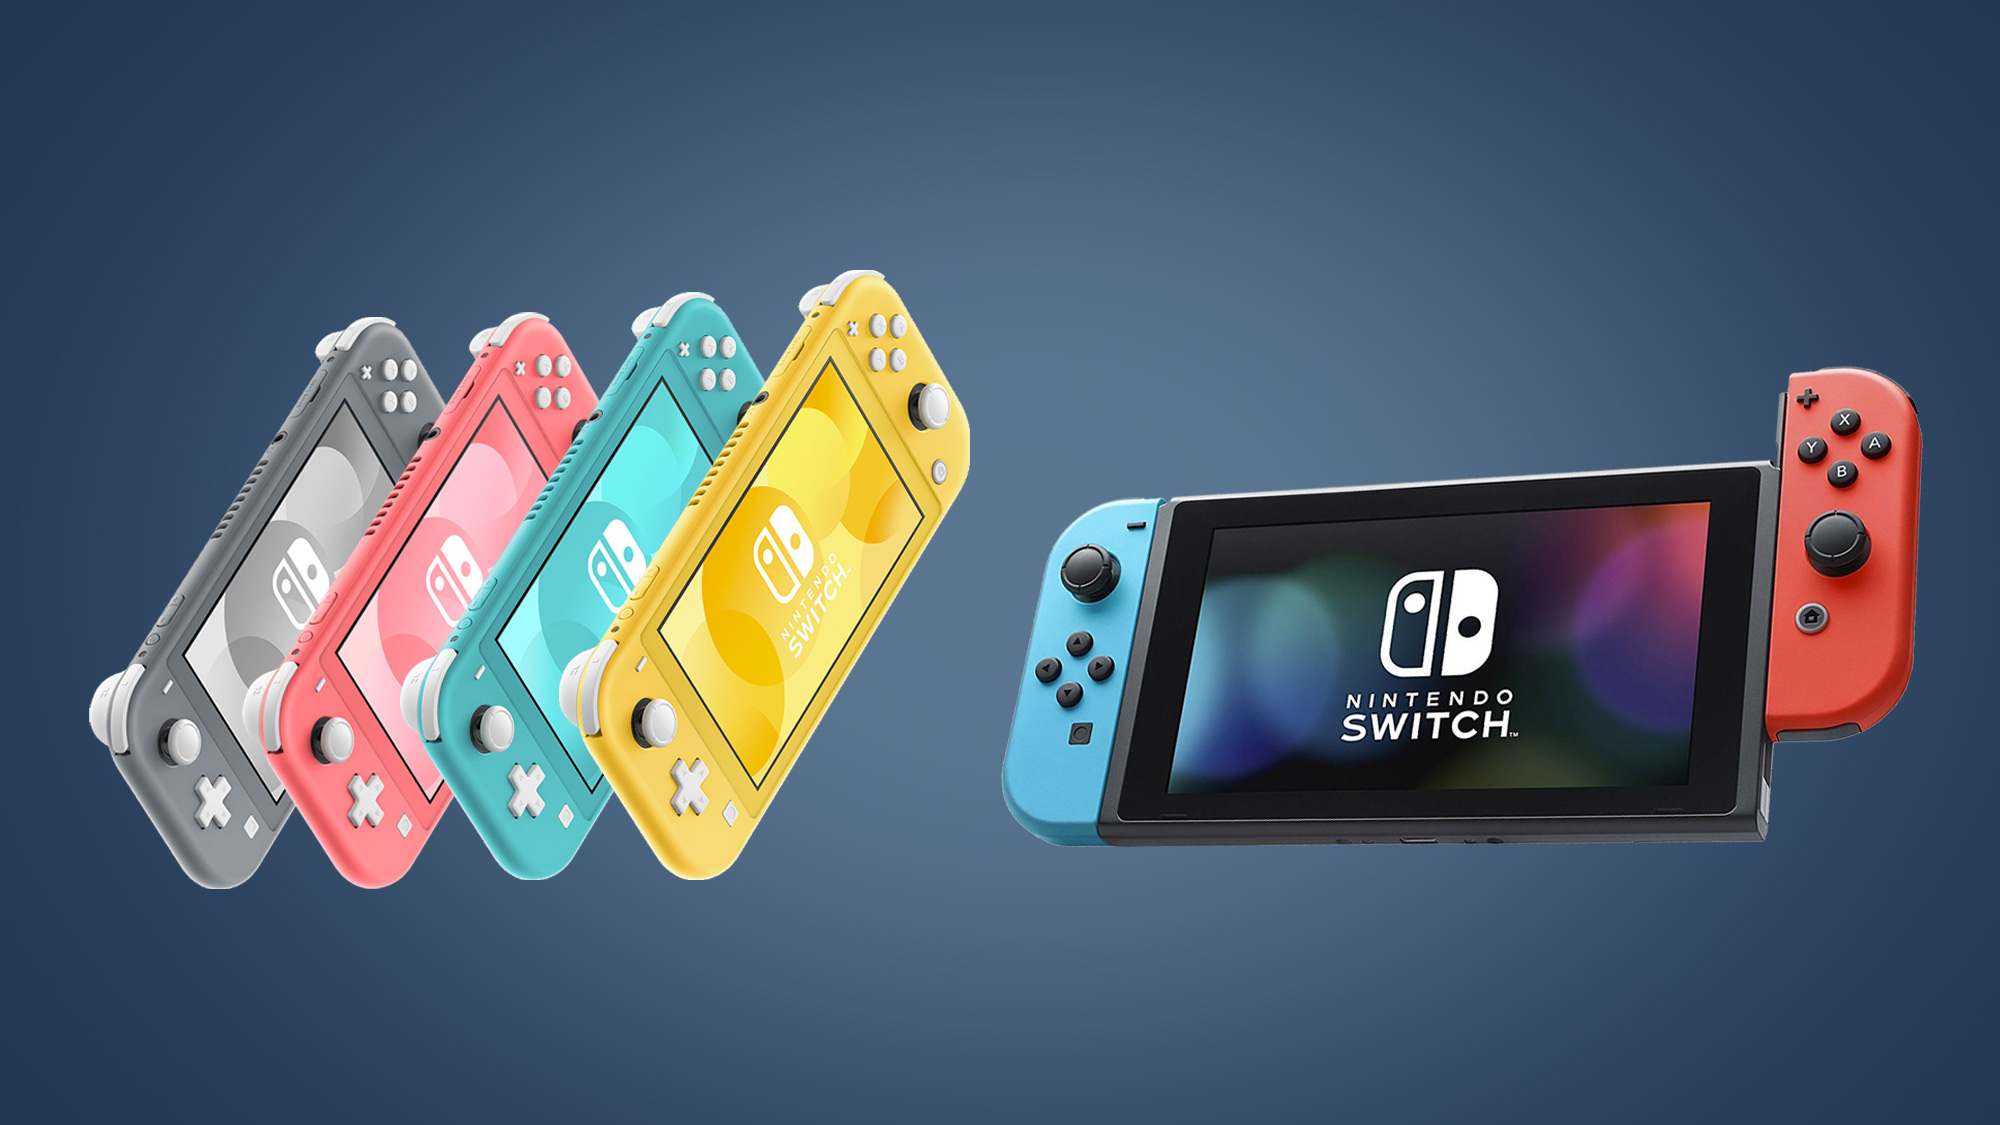 what is the cheapest price for nintendo switch